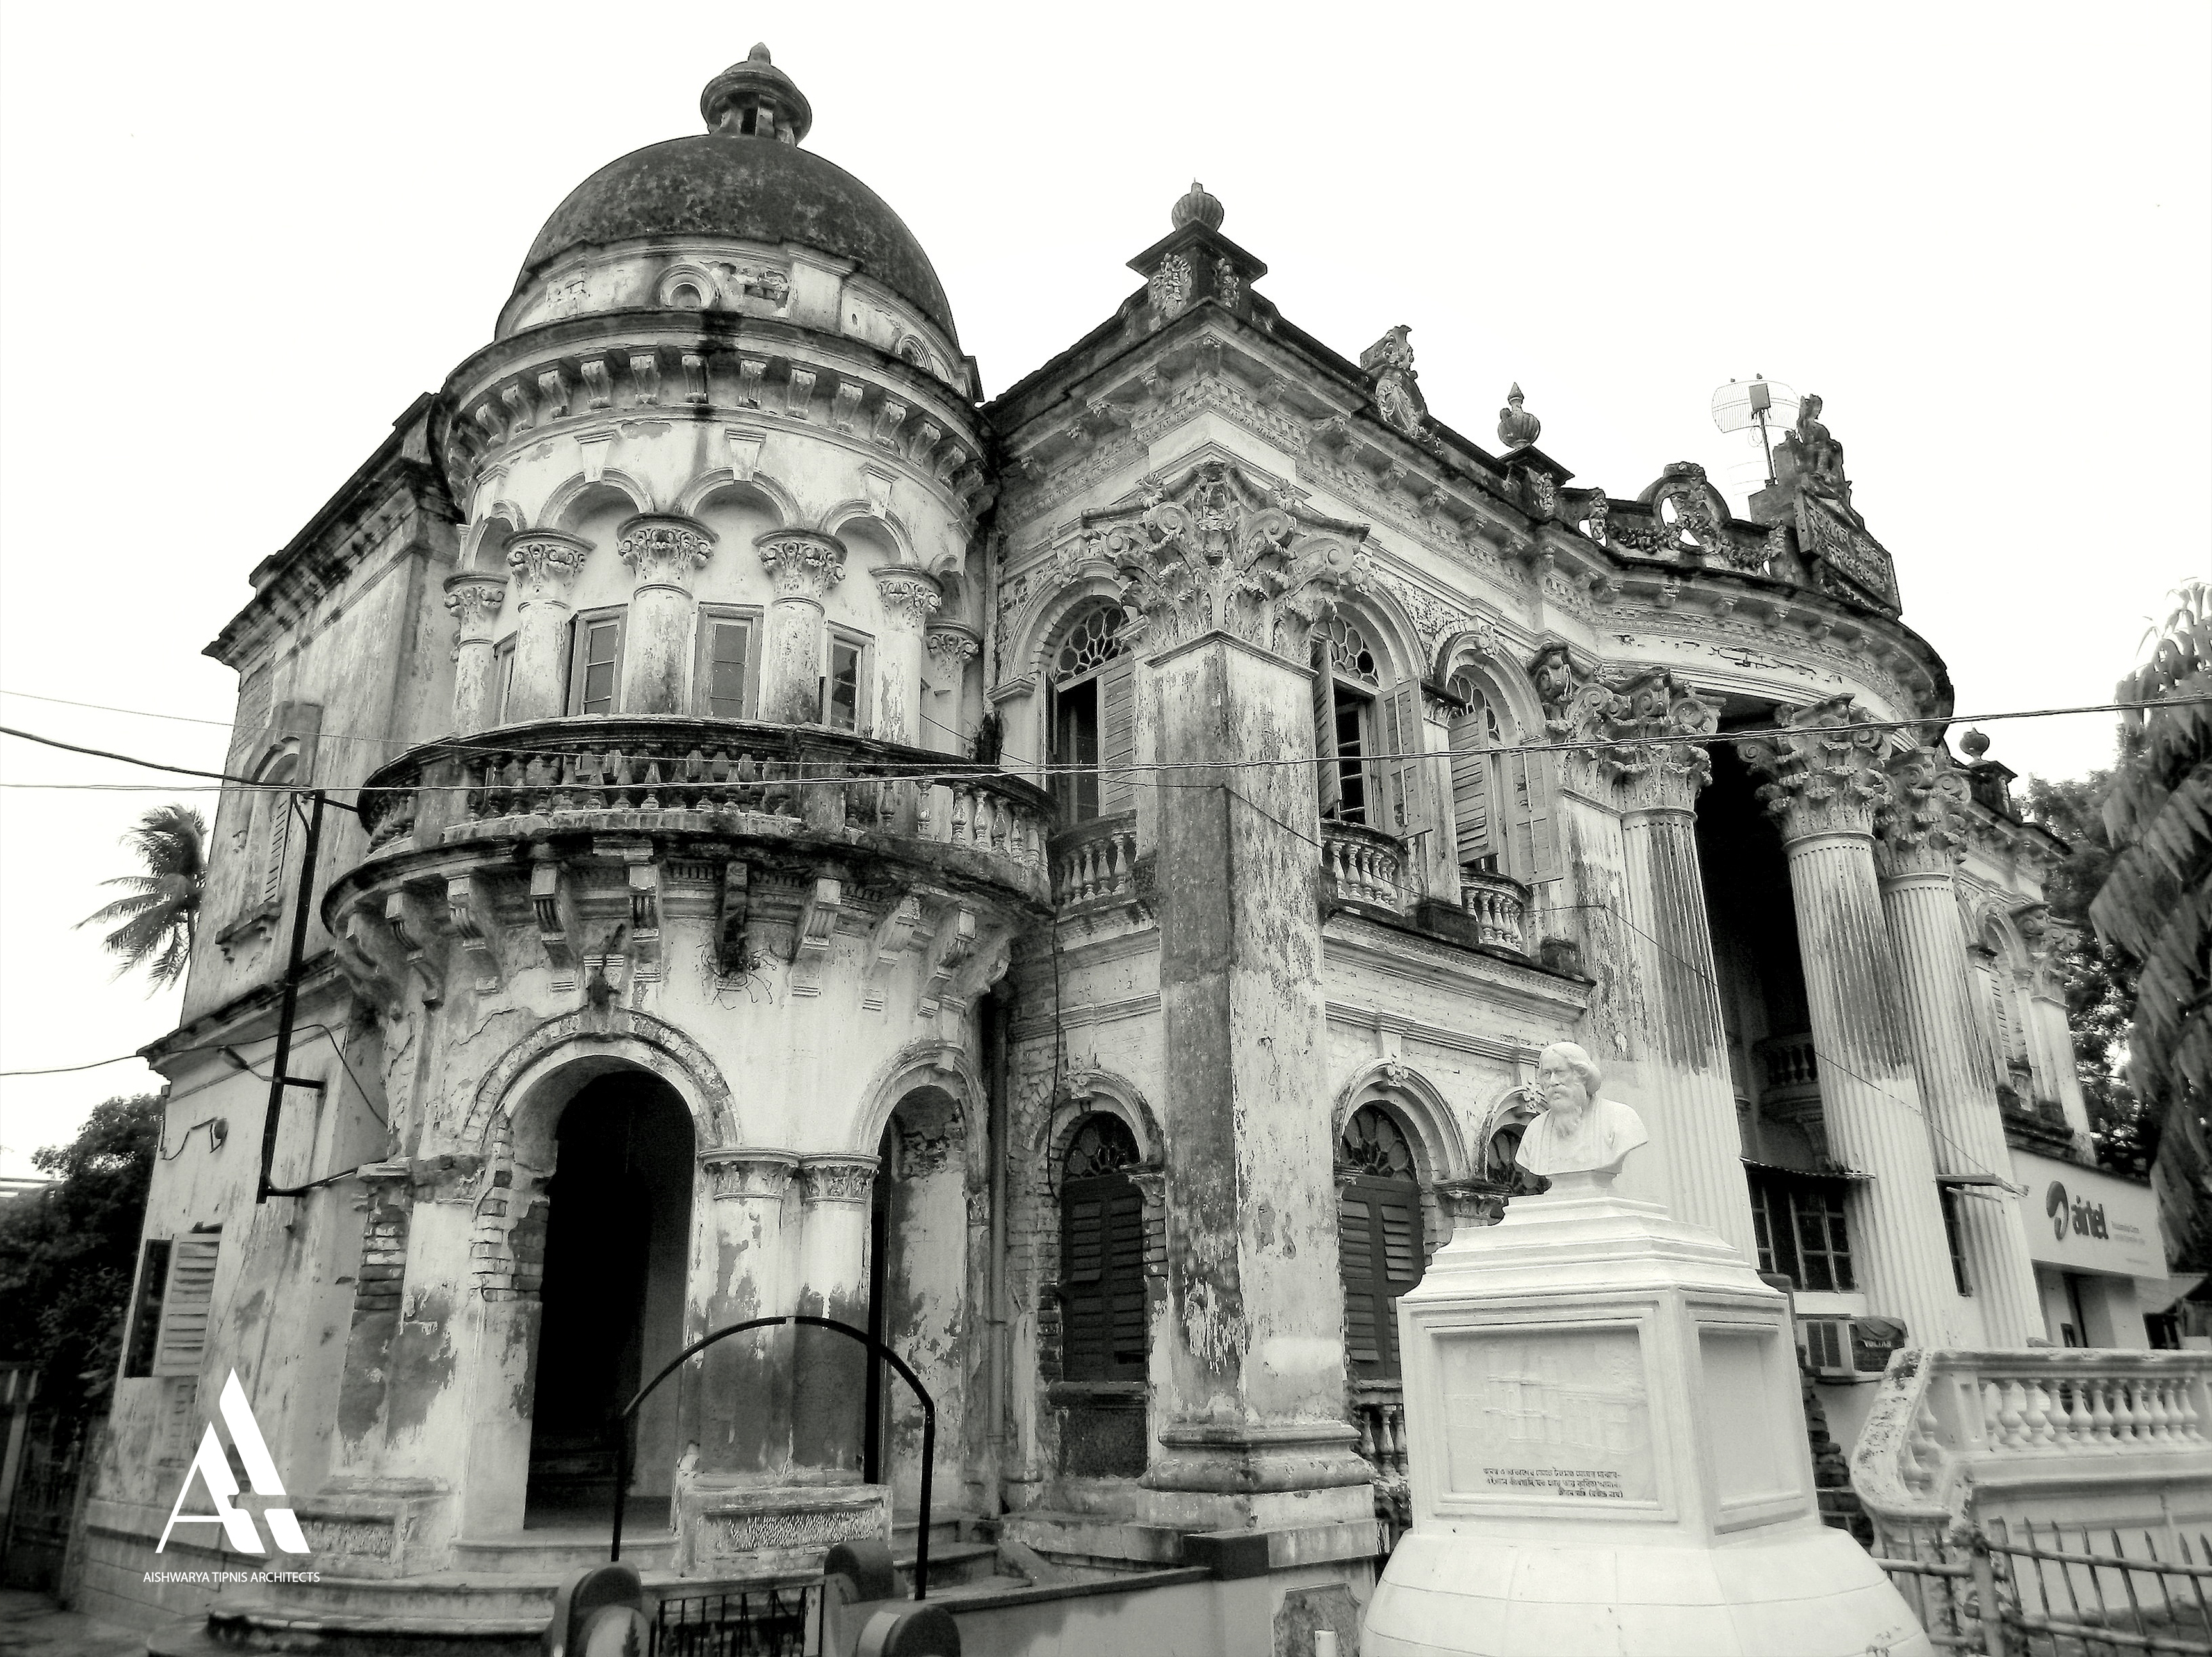 French Colonial Town of Chandernagore, West Bengal